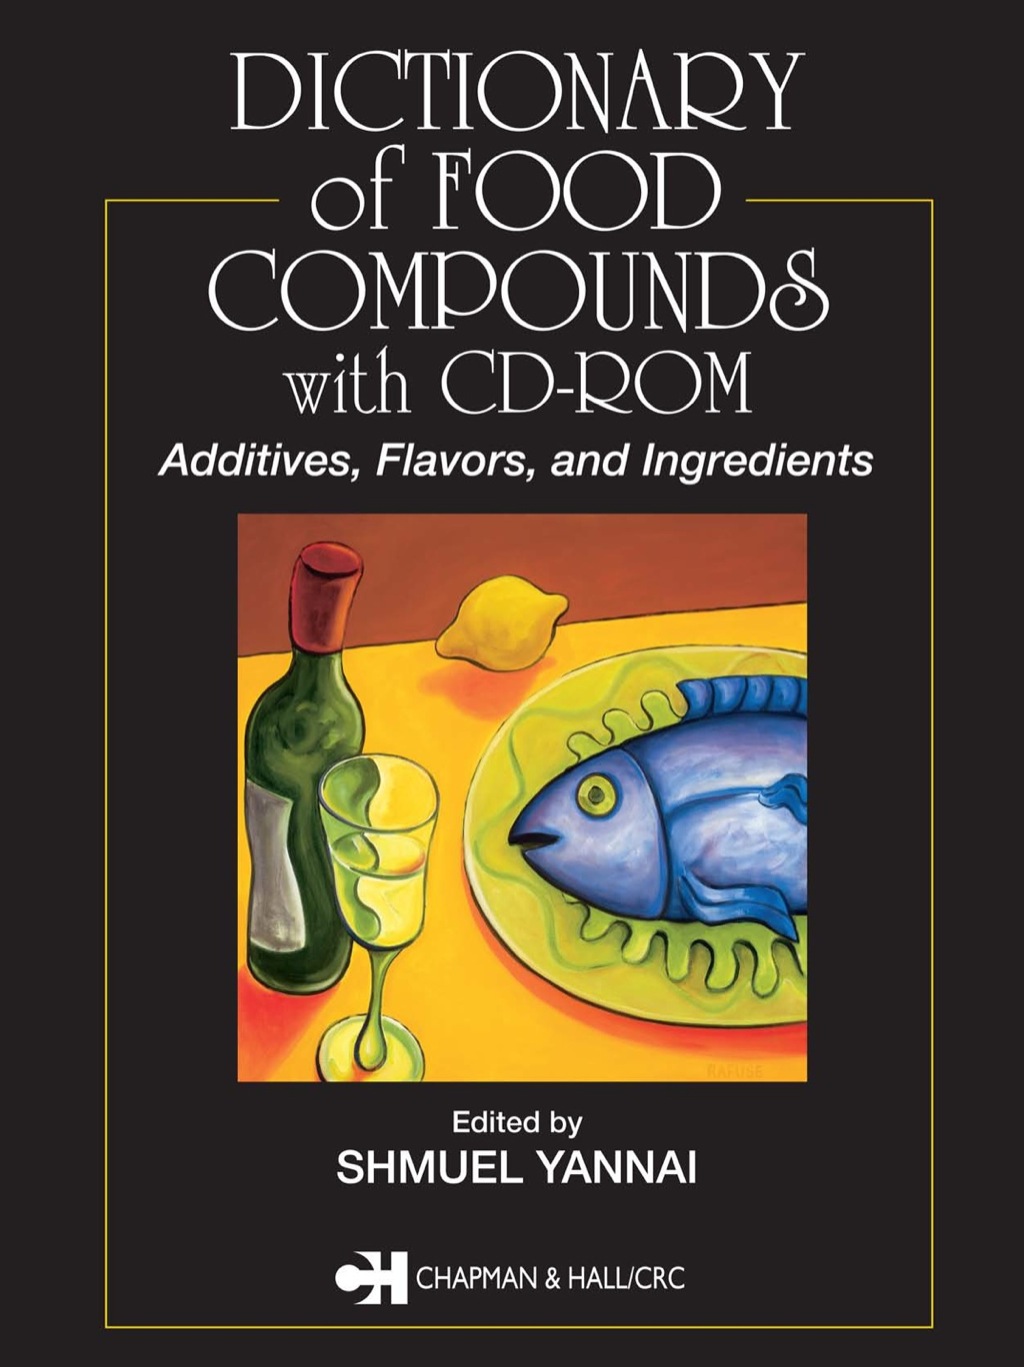 Dictionary of Food Compounds with CD-ROM (eBook) - Shmuel Yannai